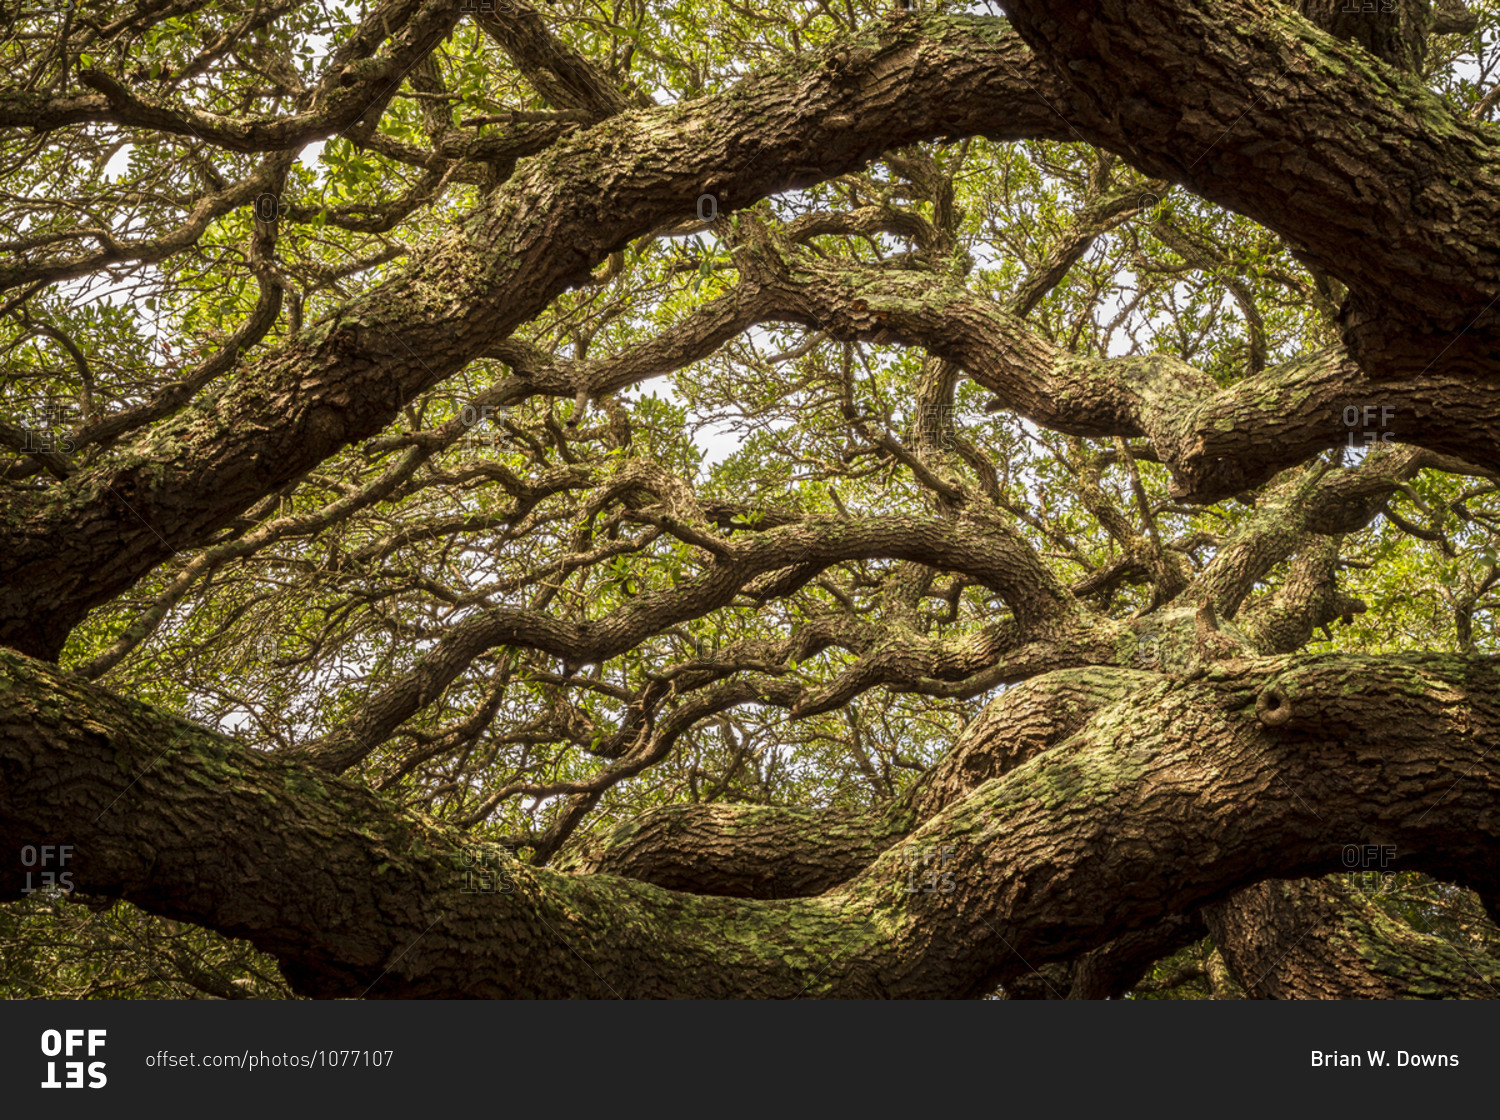 Low angle view looking up at green and brown interwoven branches of a several hundred year old live oak tree